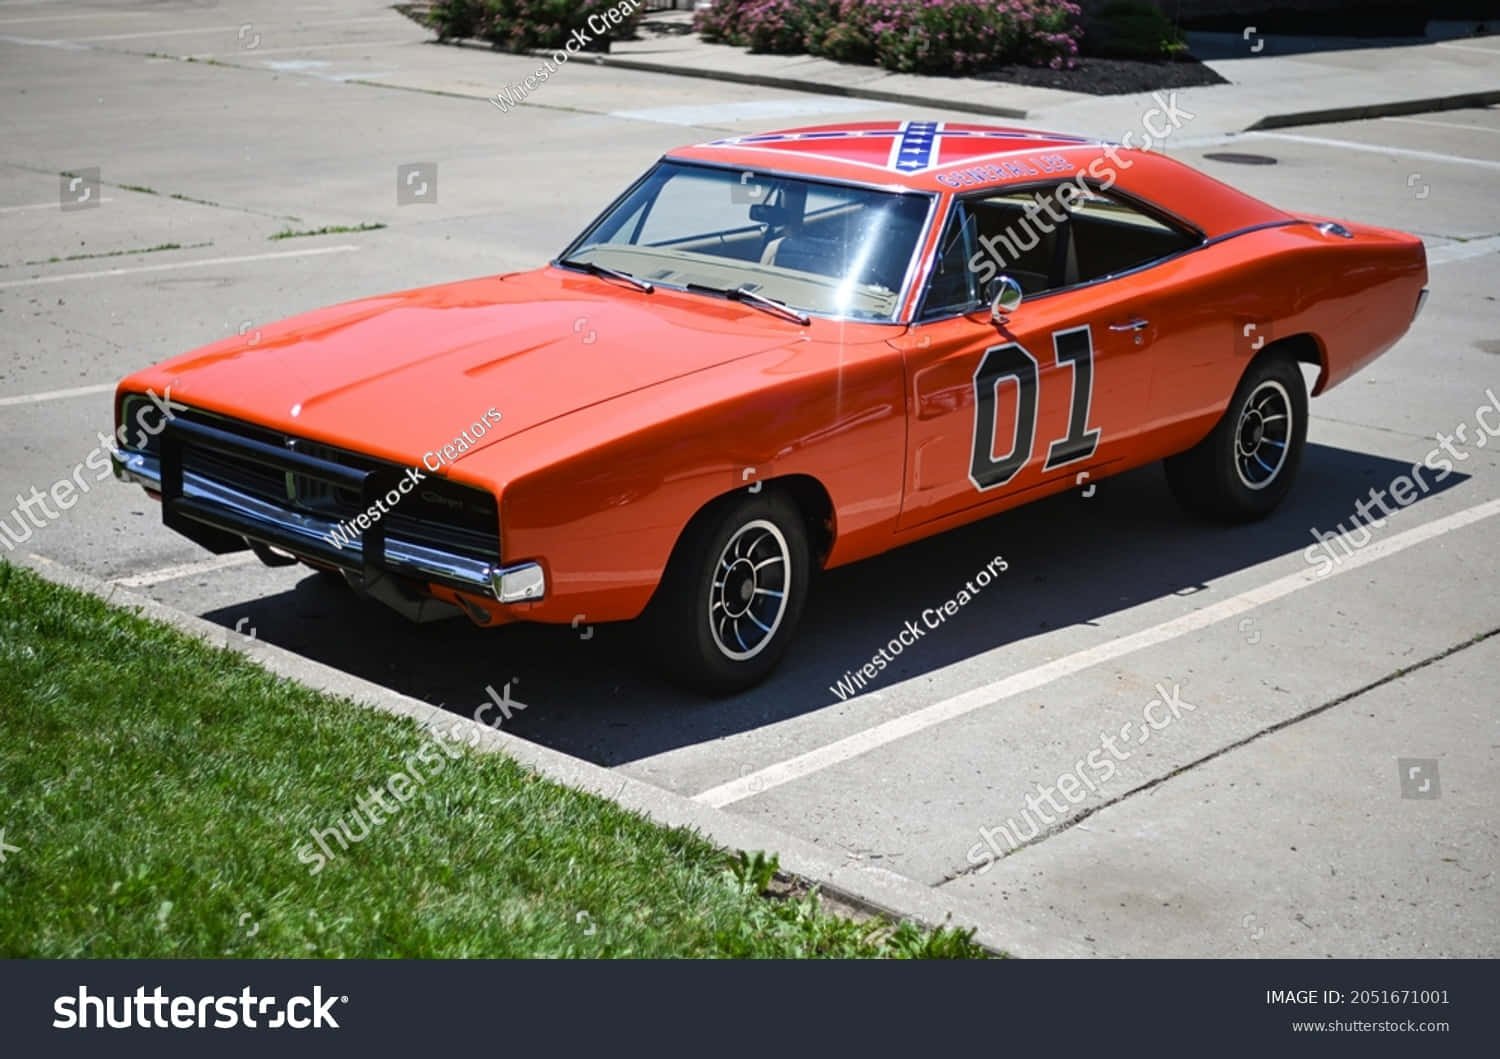 An Orange Dodge Charger Parked In A Parking Lot Wallpaper